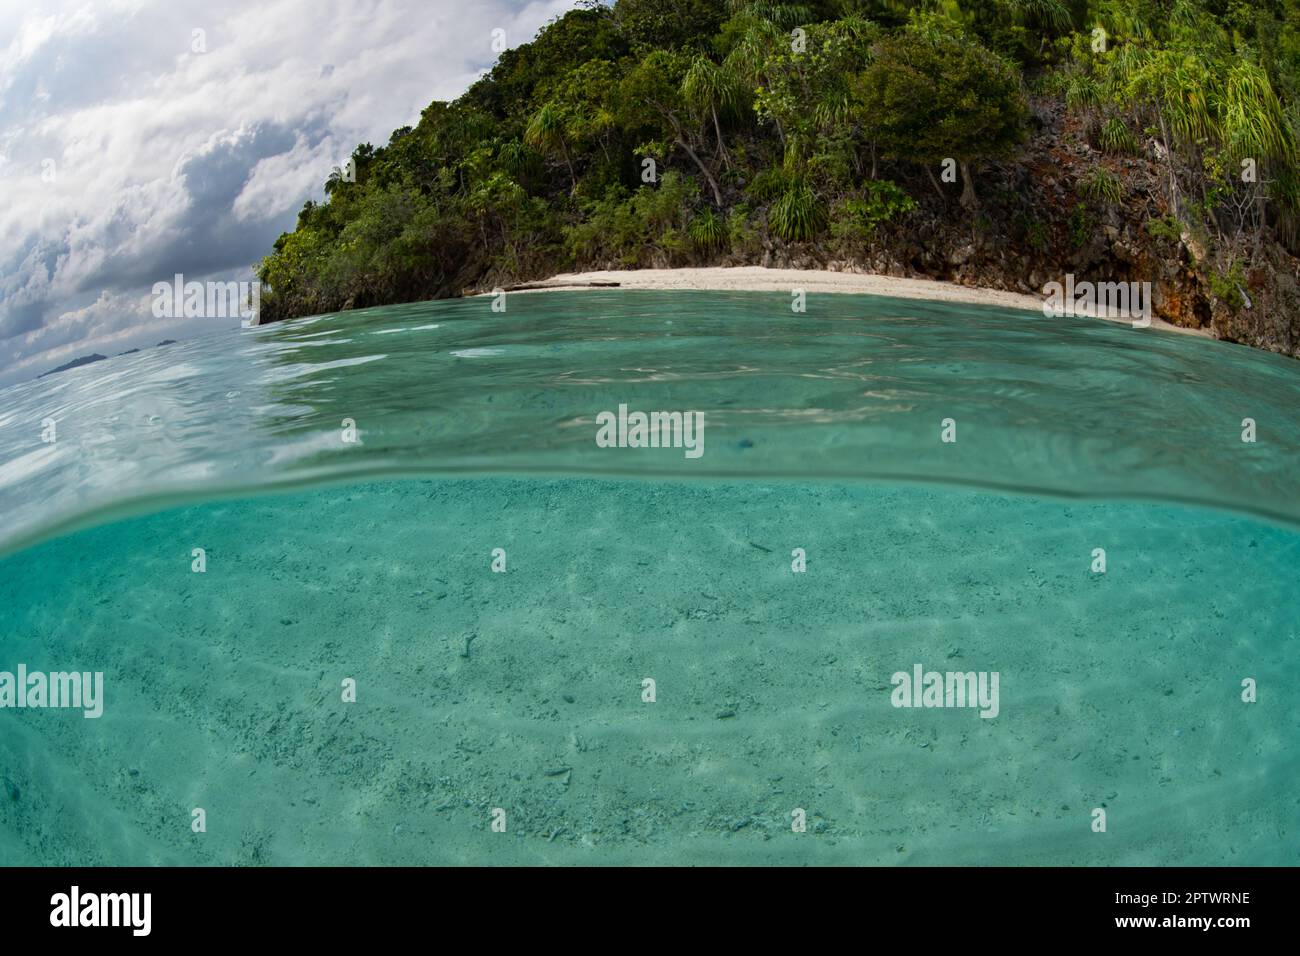 Clear, warm water bathes a remote tropical island off the coast of West Papua, Indonesia. This spectacular region harbors high marine biodiversity. Stock Photo